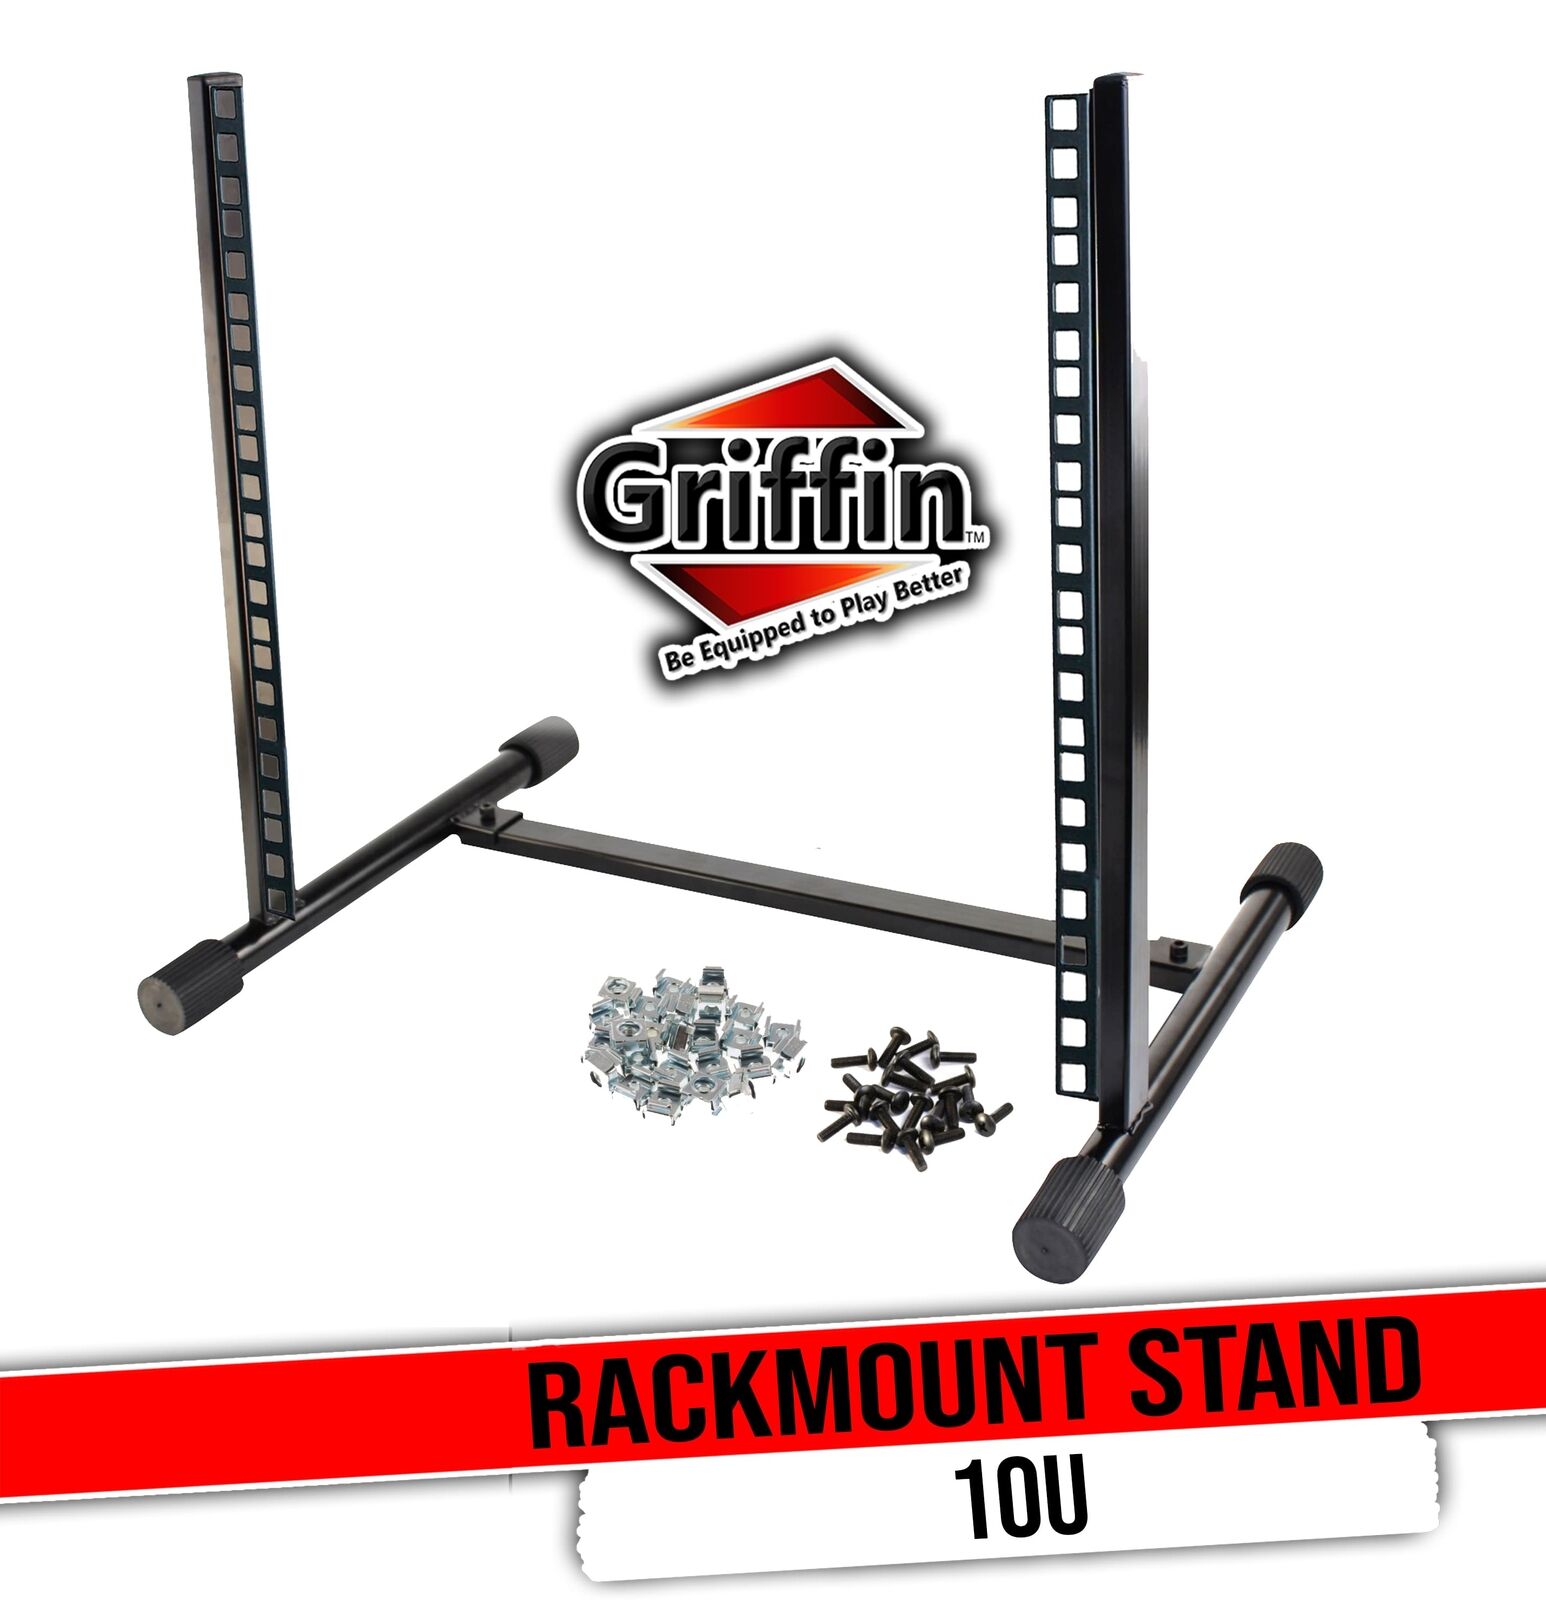 Rack Mount Stand with 10 Spaces by GRIFFIN | Music Studio Recording Equipment